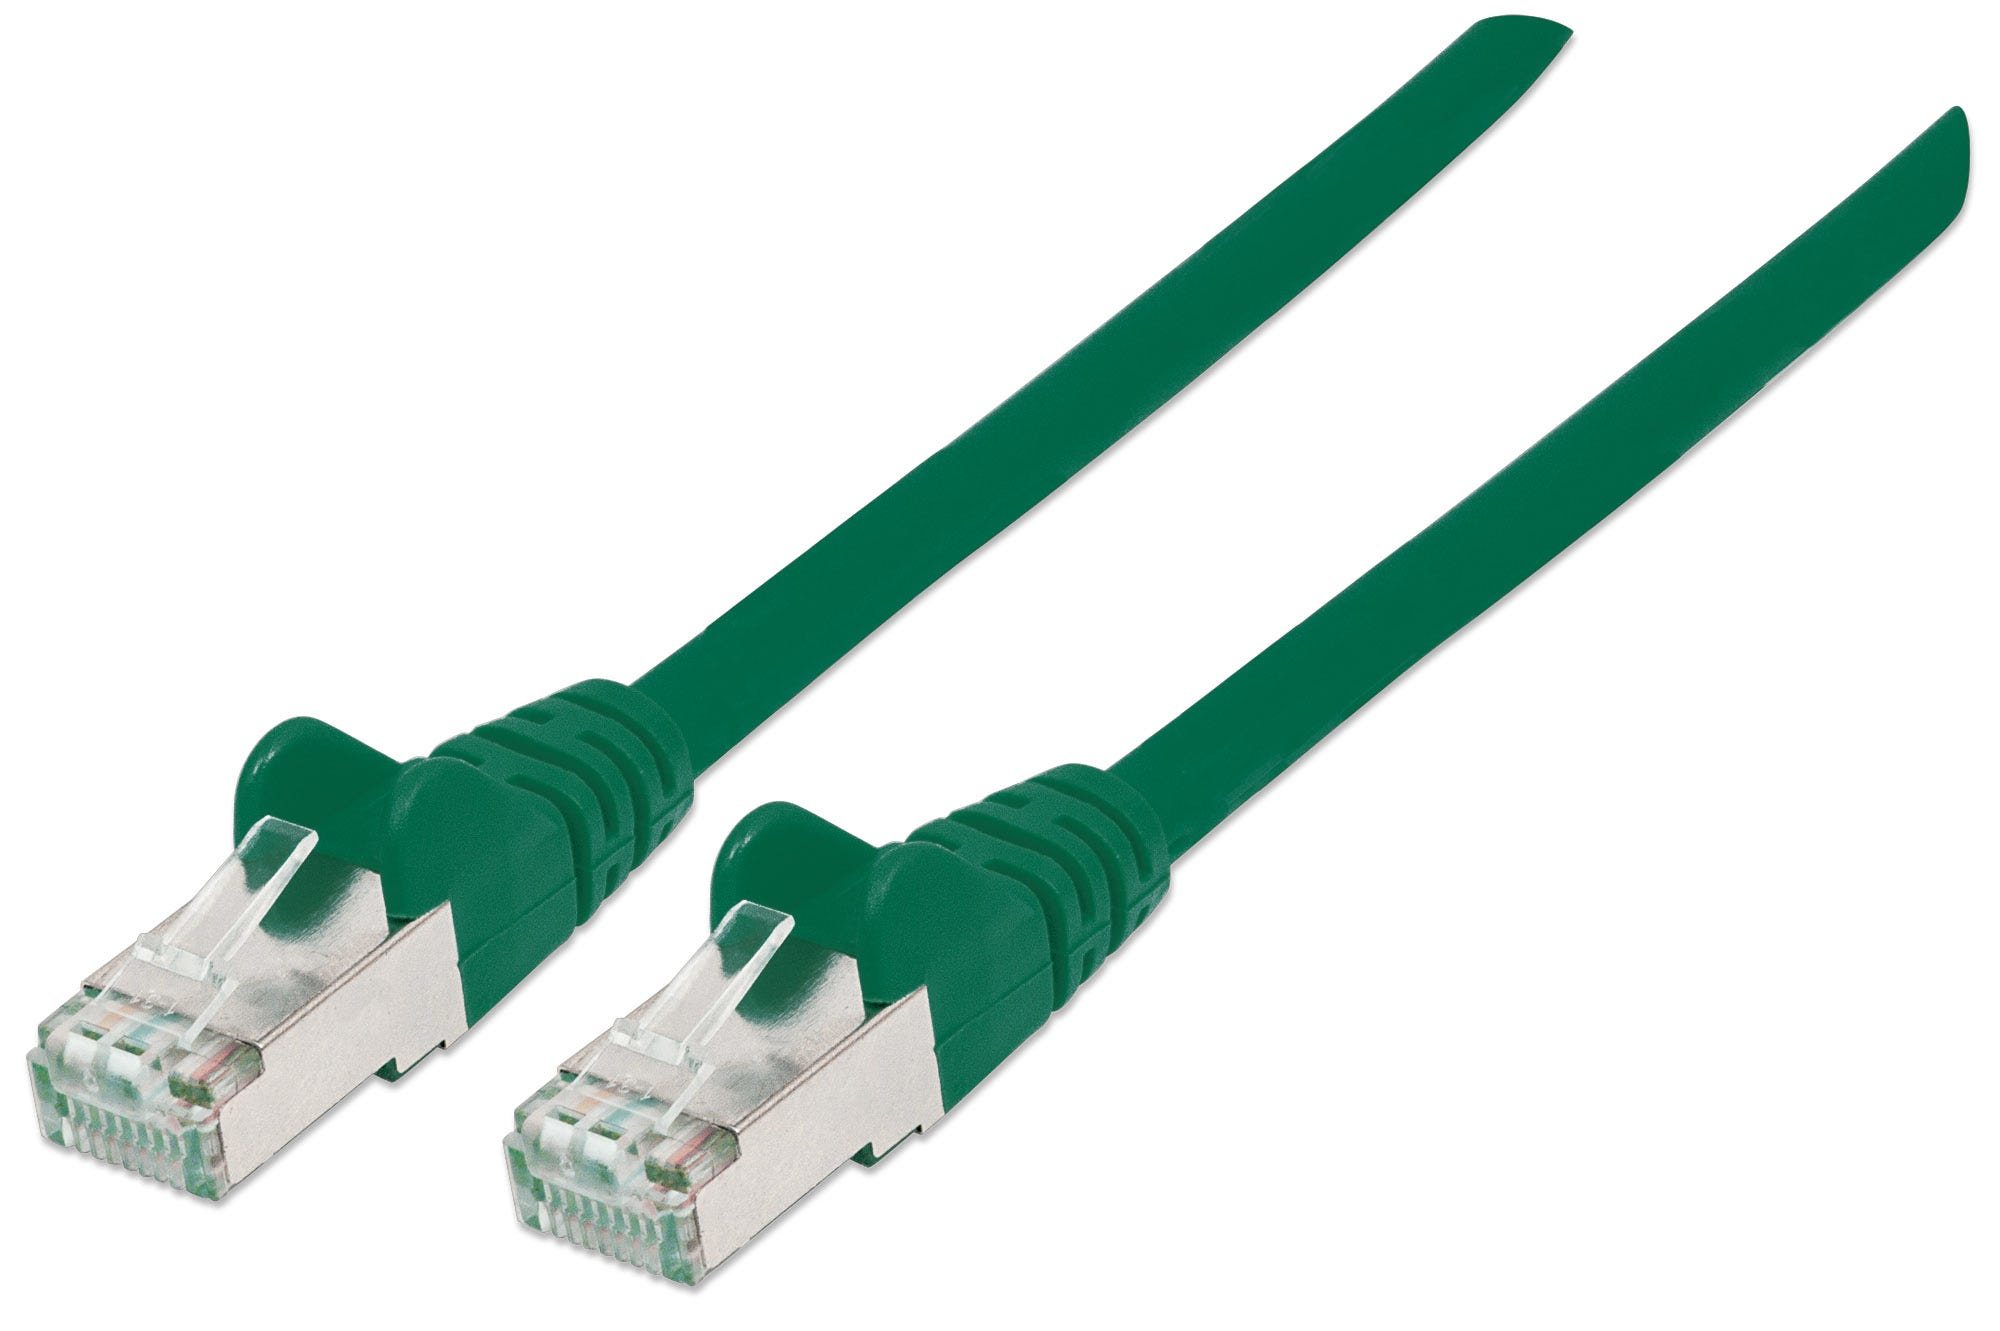 Photos - Cable (video, audio, USB) INTELLINET Network Patch Cable, Cat6, 30m, Green, Copper, S/FTP, LSOH 7360 